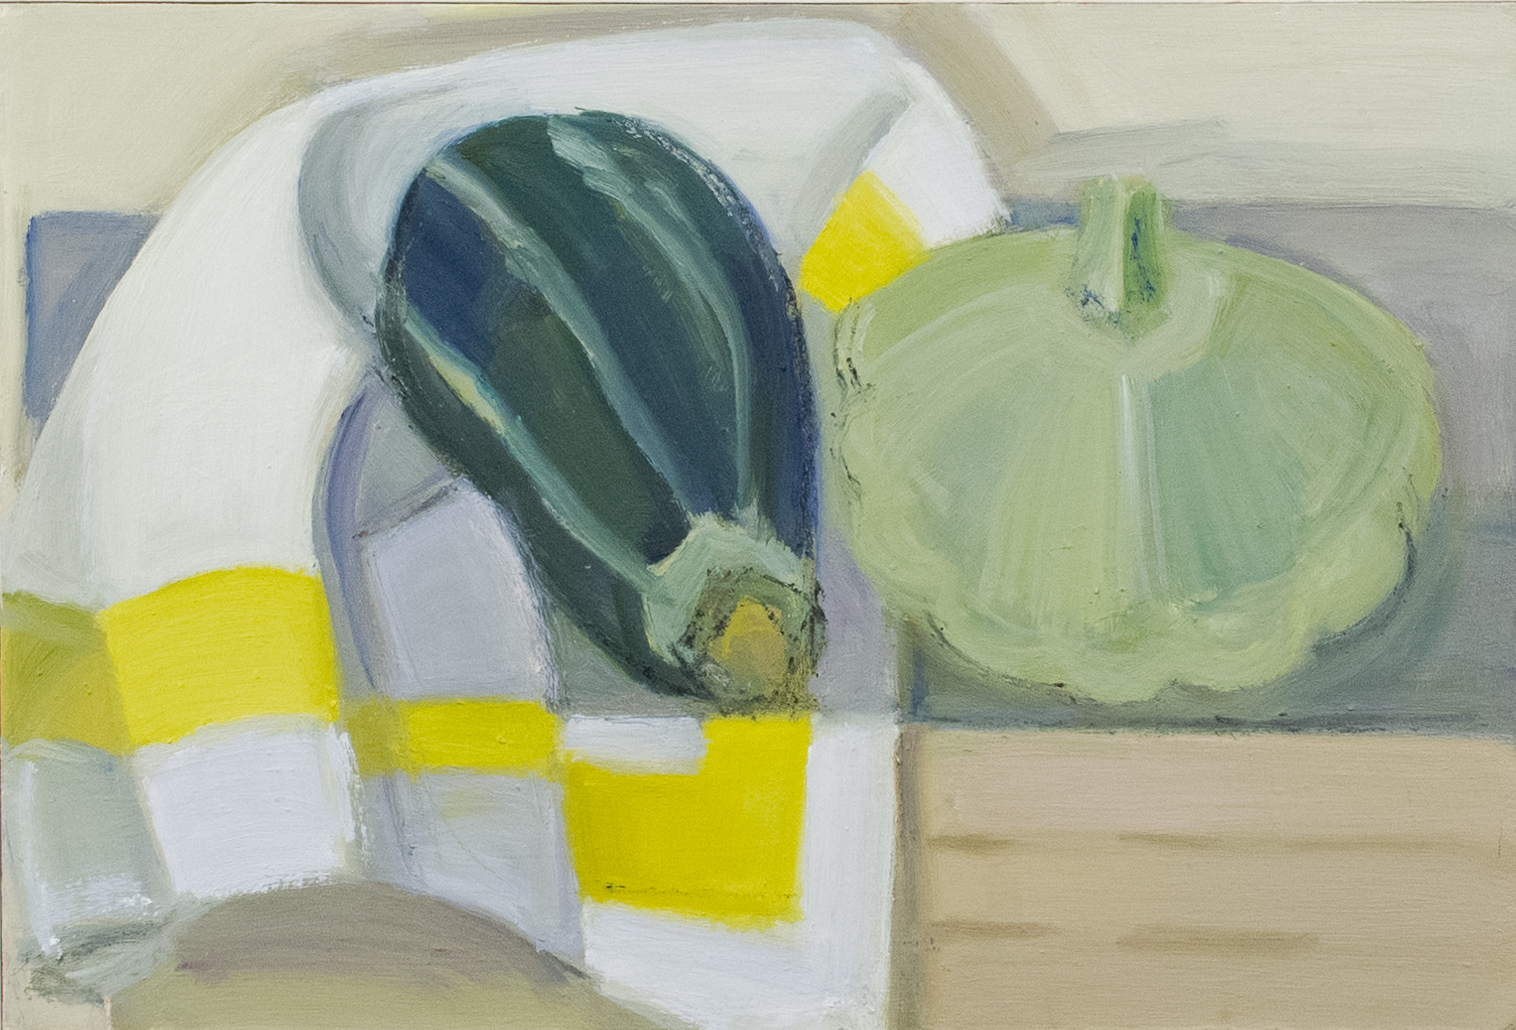   Tiger and White Pattypan Squash , 2017, oil on panel, 7” x 12”  (Private collection)  